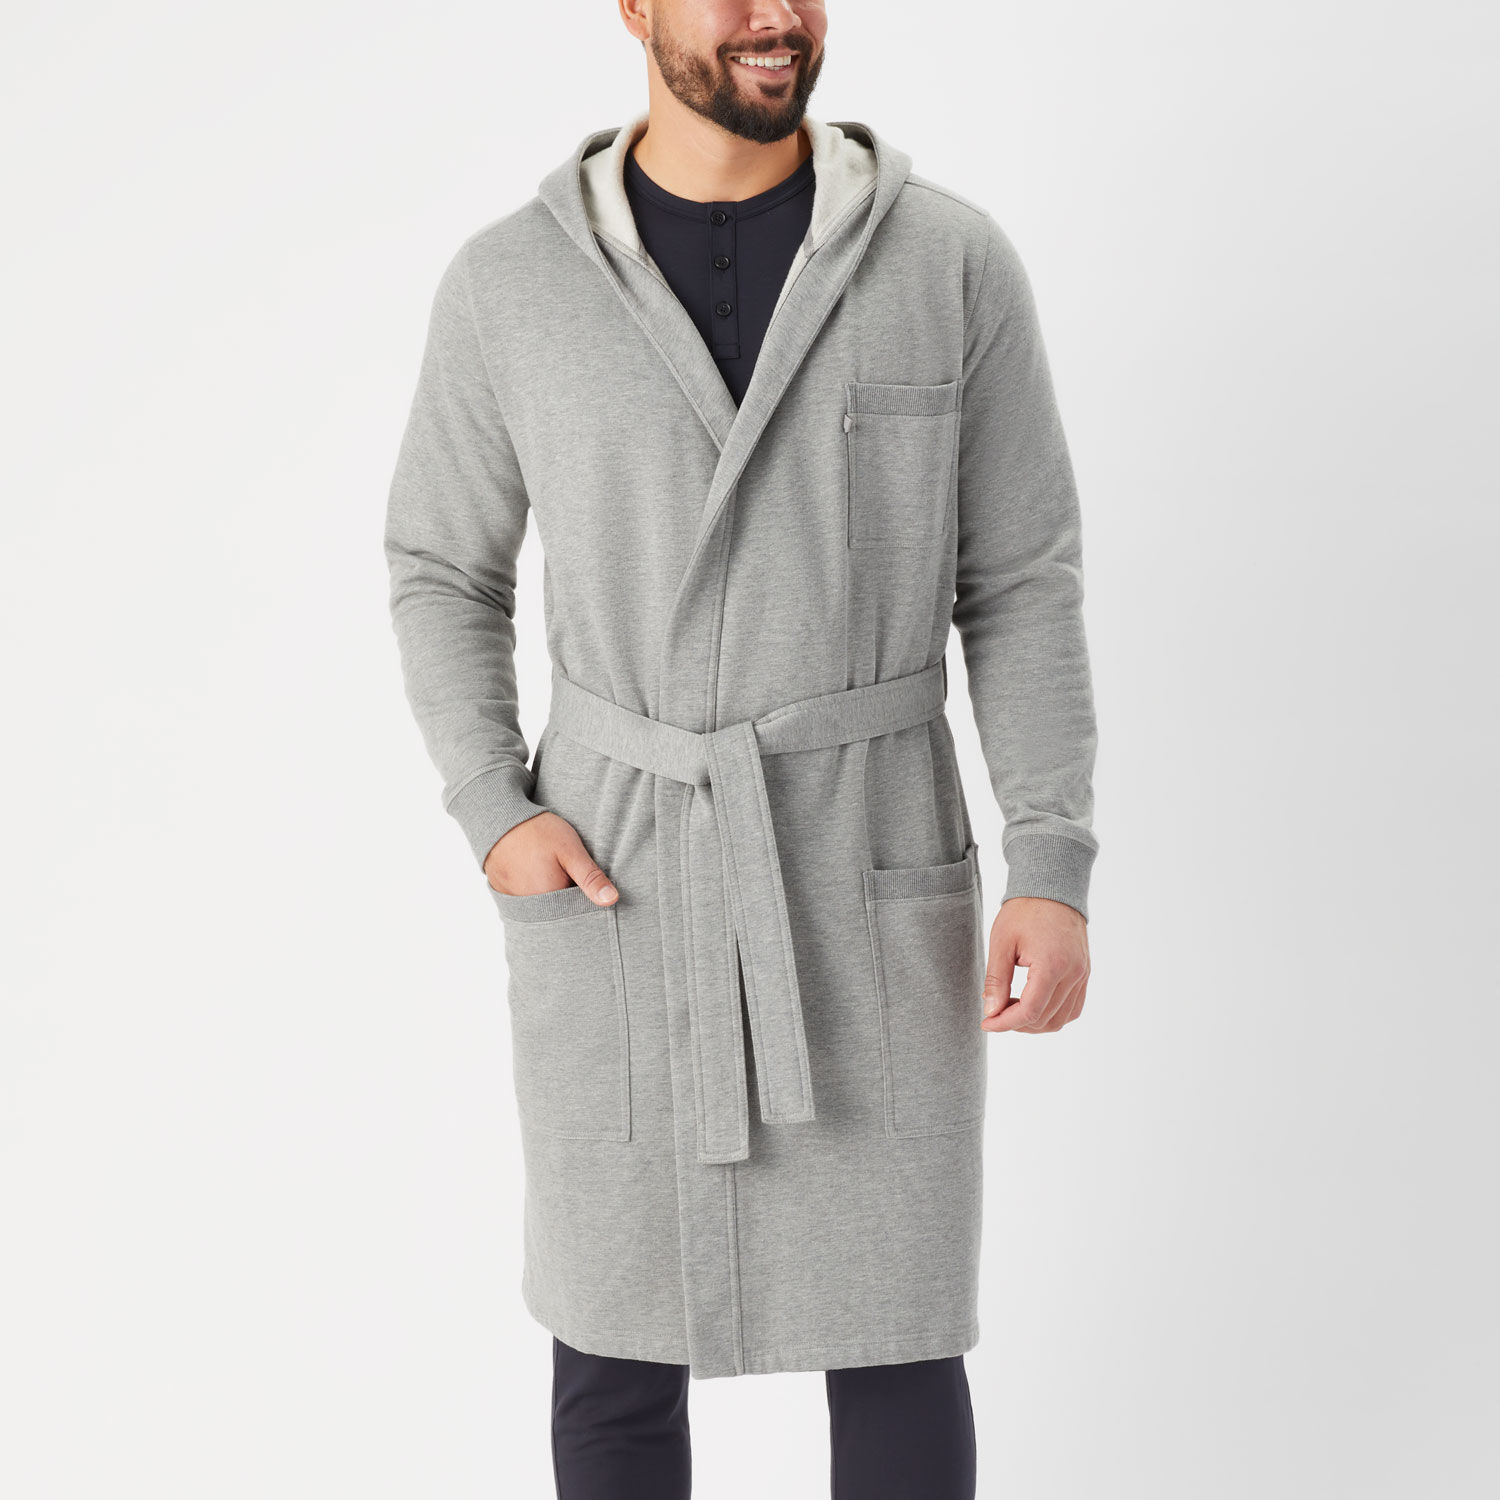 Personalised Tivoli Waffle Travel Dressing Gown By The Fine Cotton Company  | notonthehighstreet.com